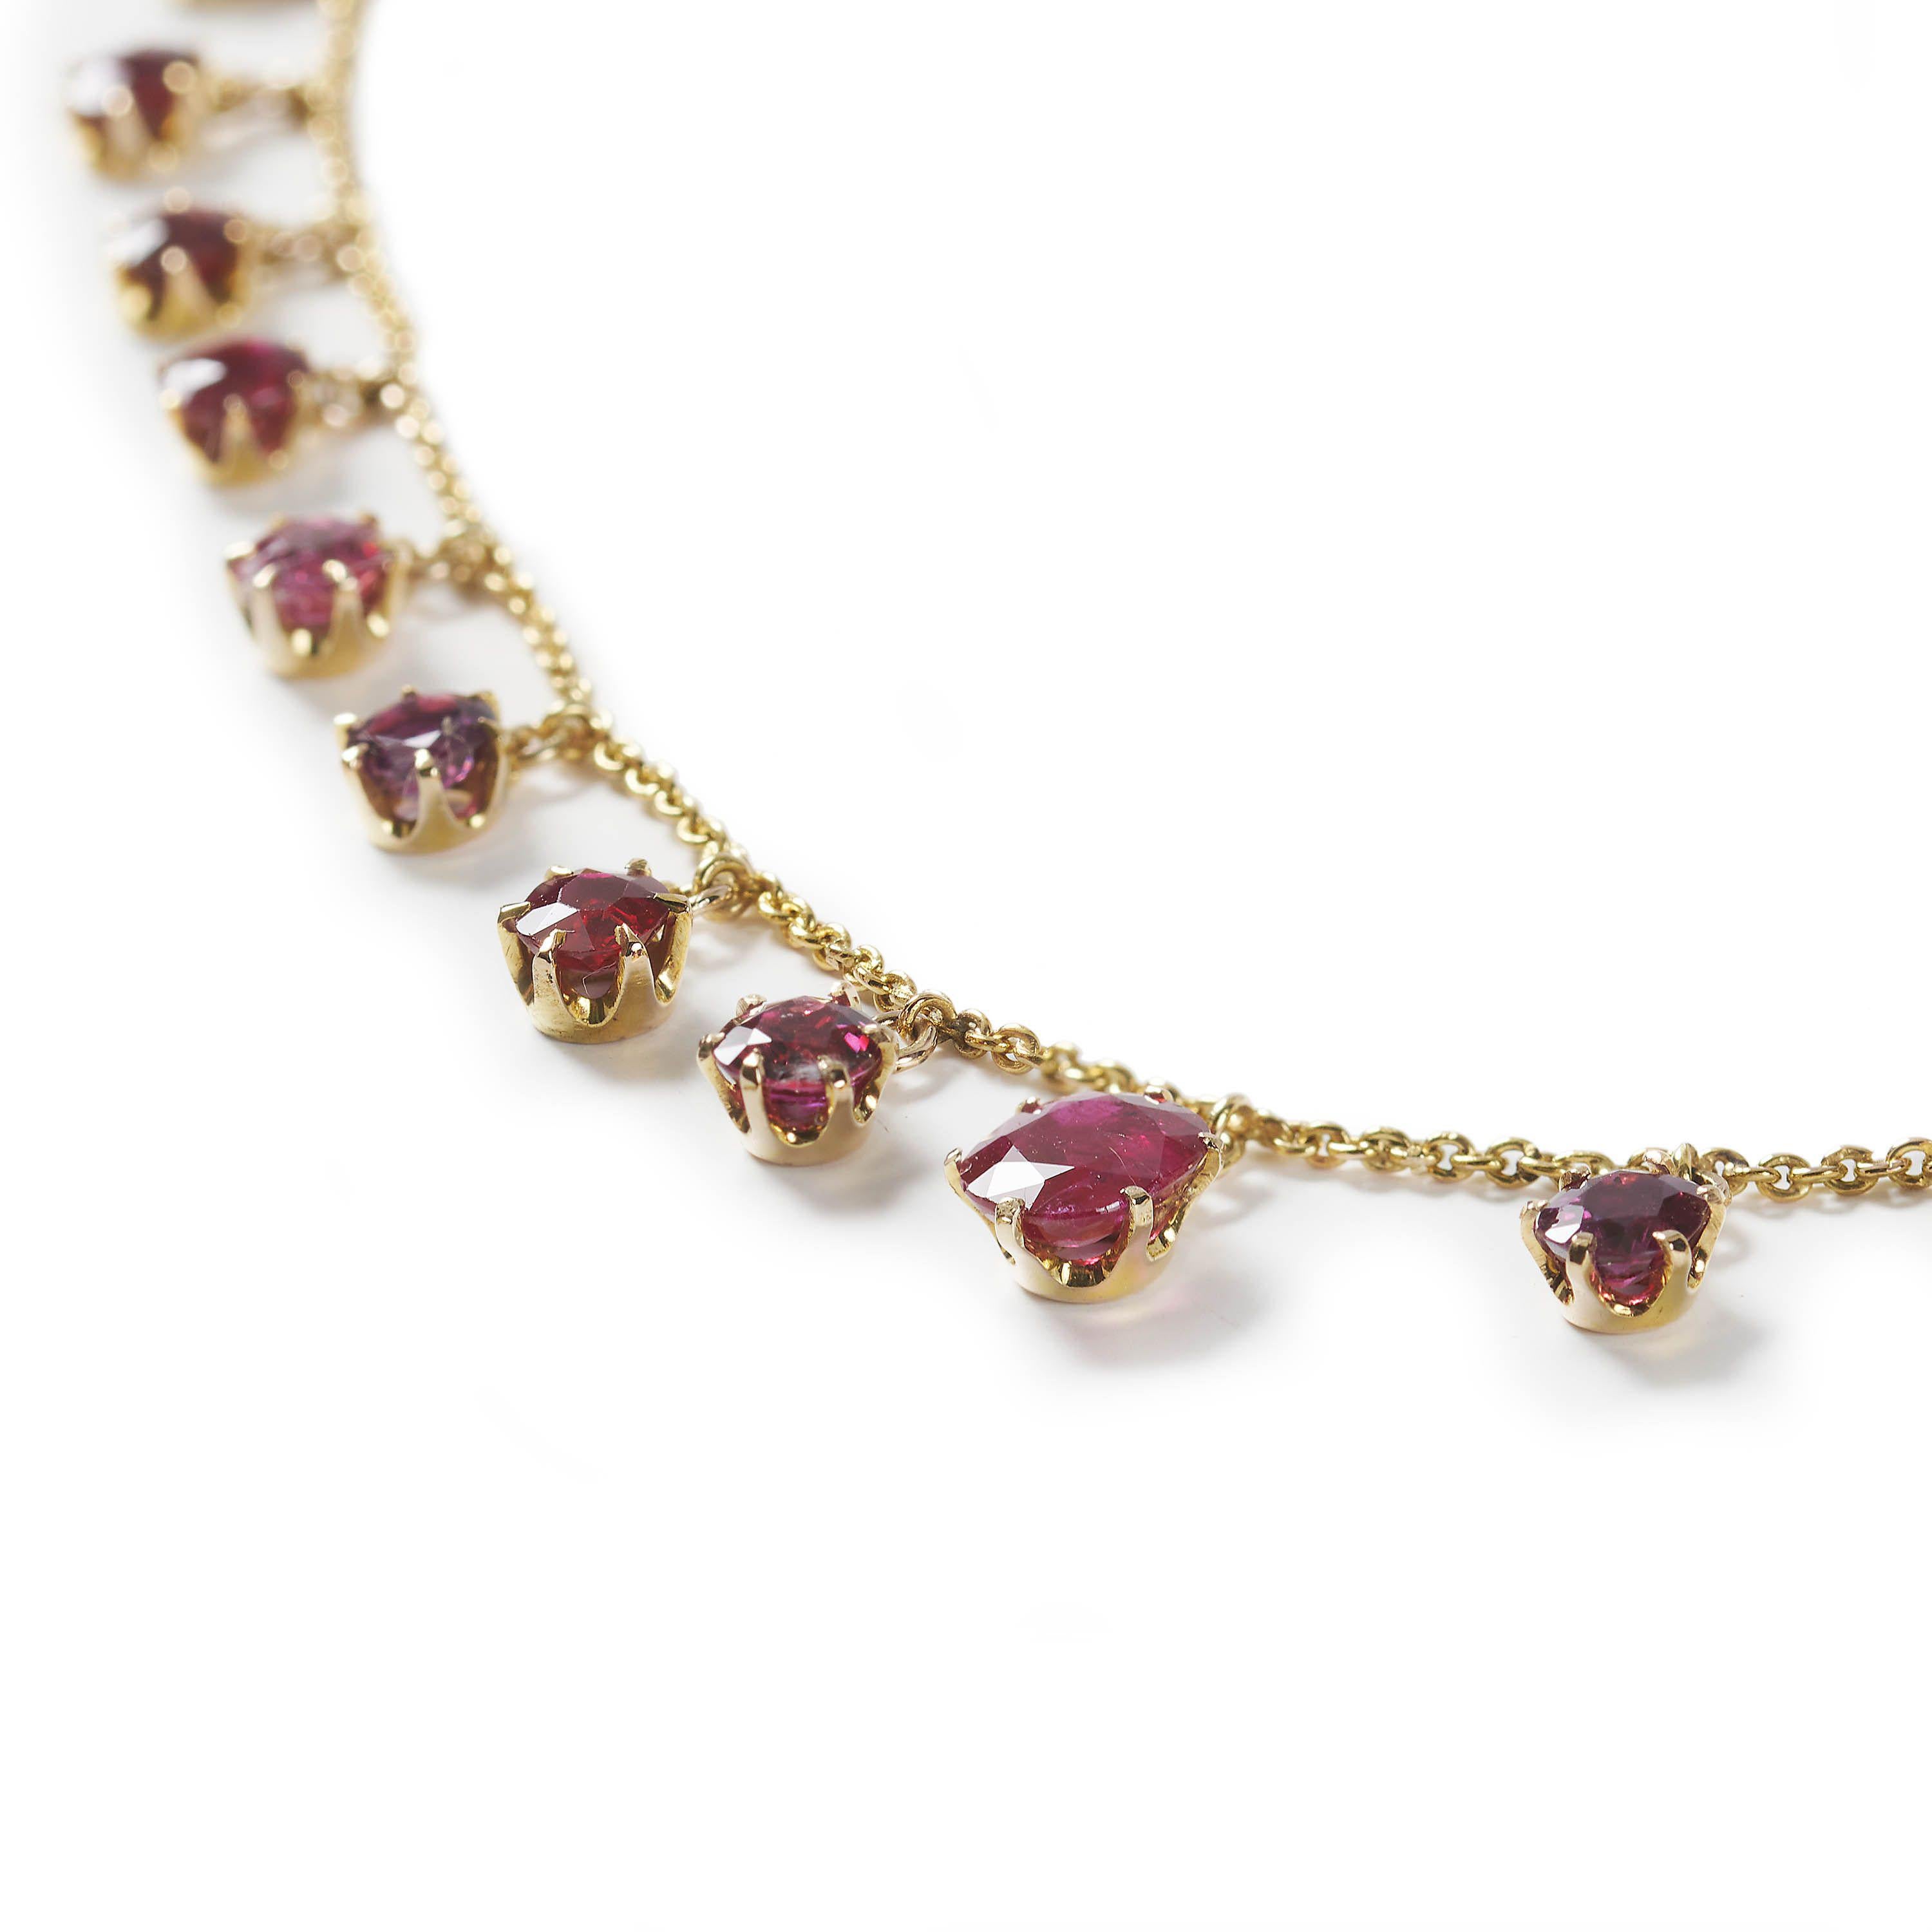 Antique Cushion Cut Antique Ruby And Gold Fringe Necklace, Circa 1920 For Sale